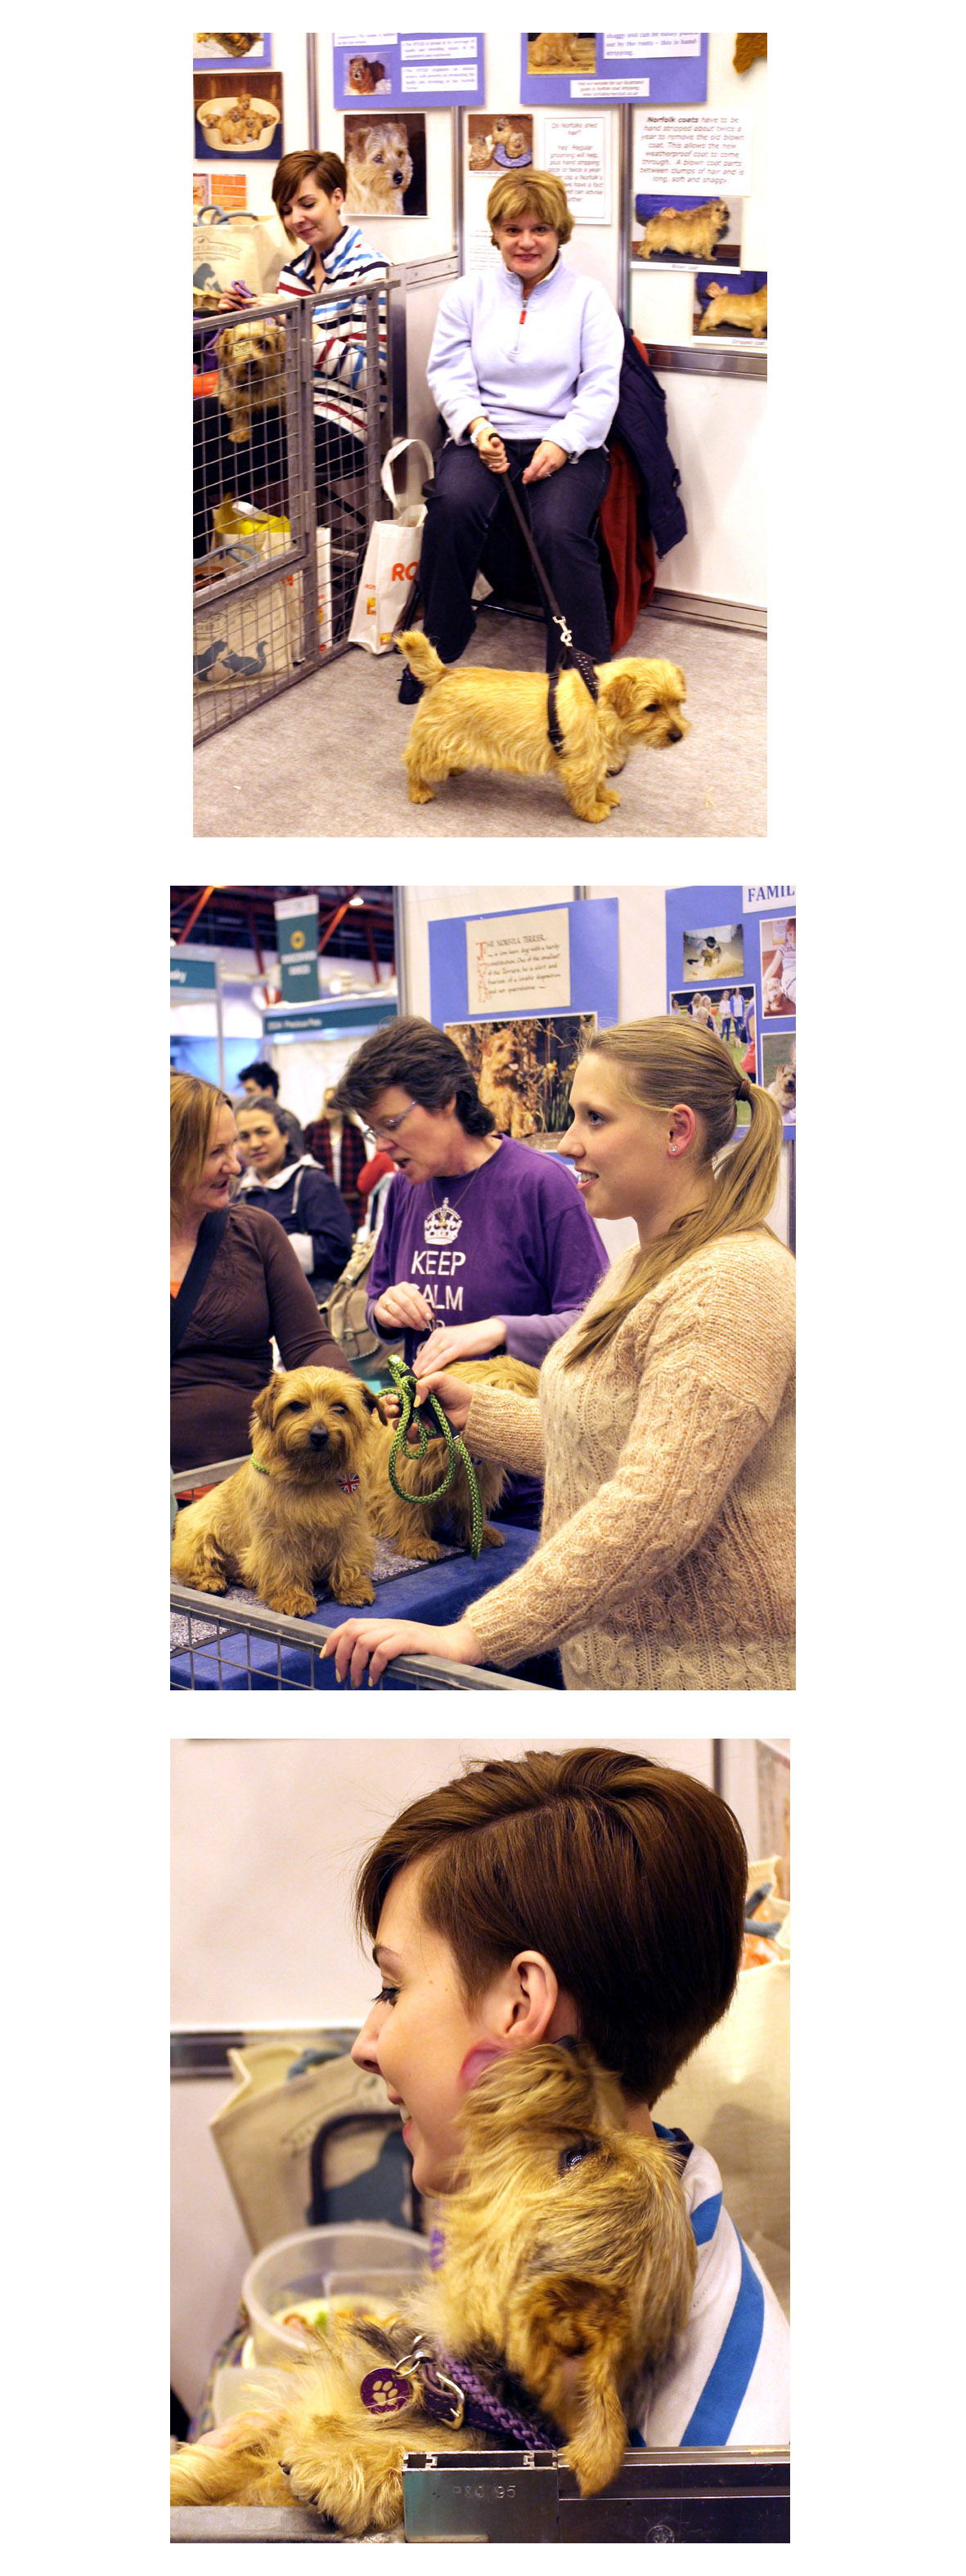 Discover Dogs London Pet Show 2013